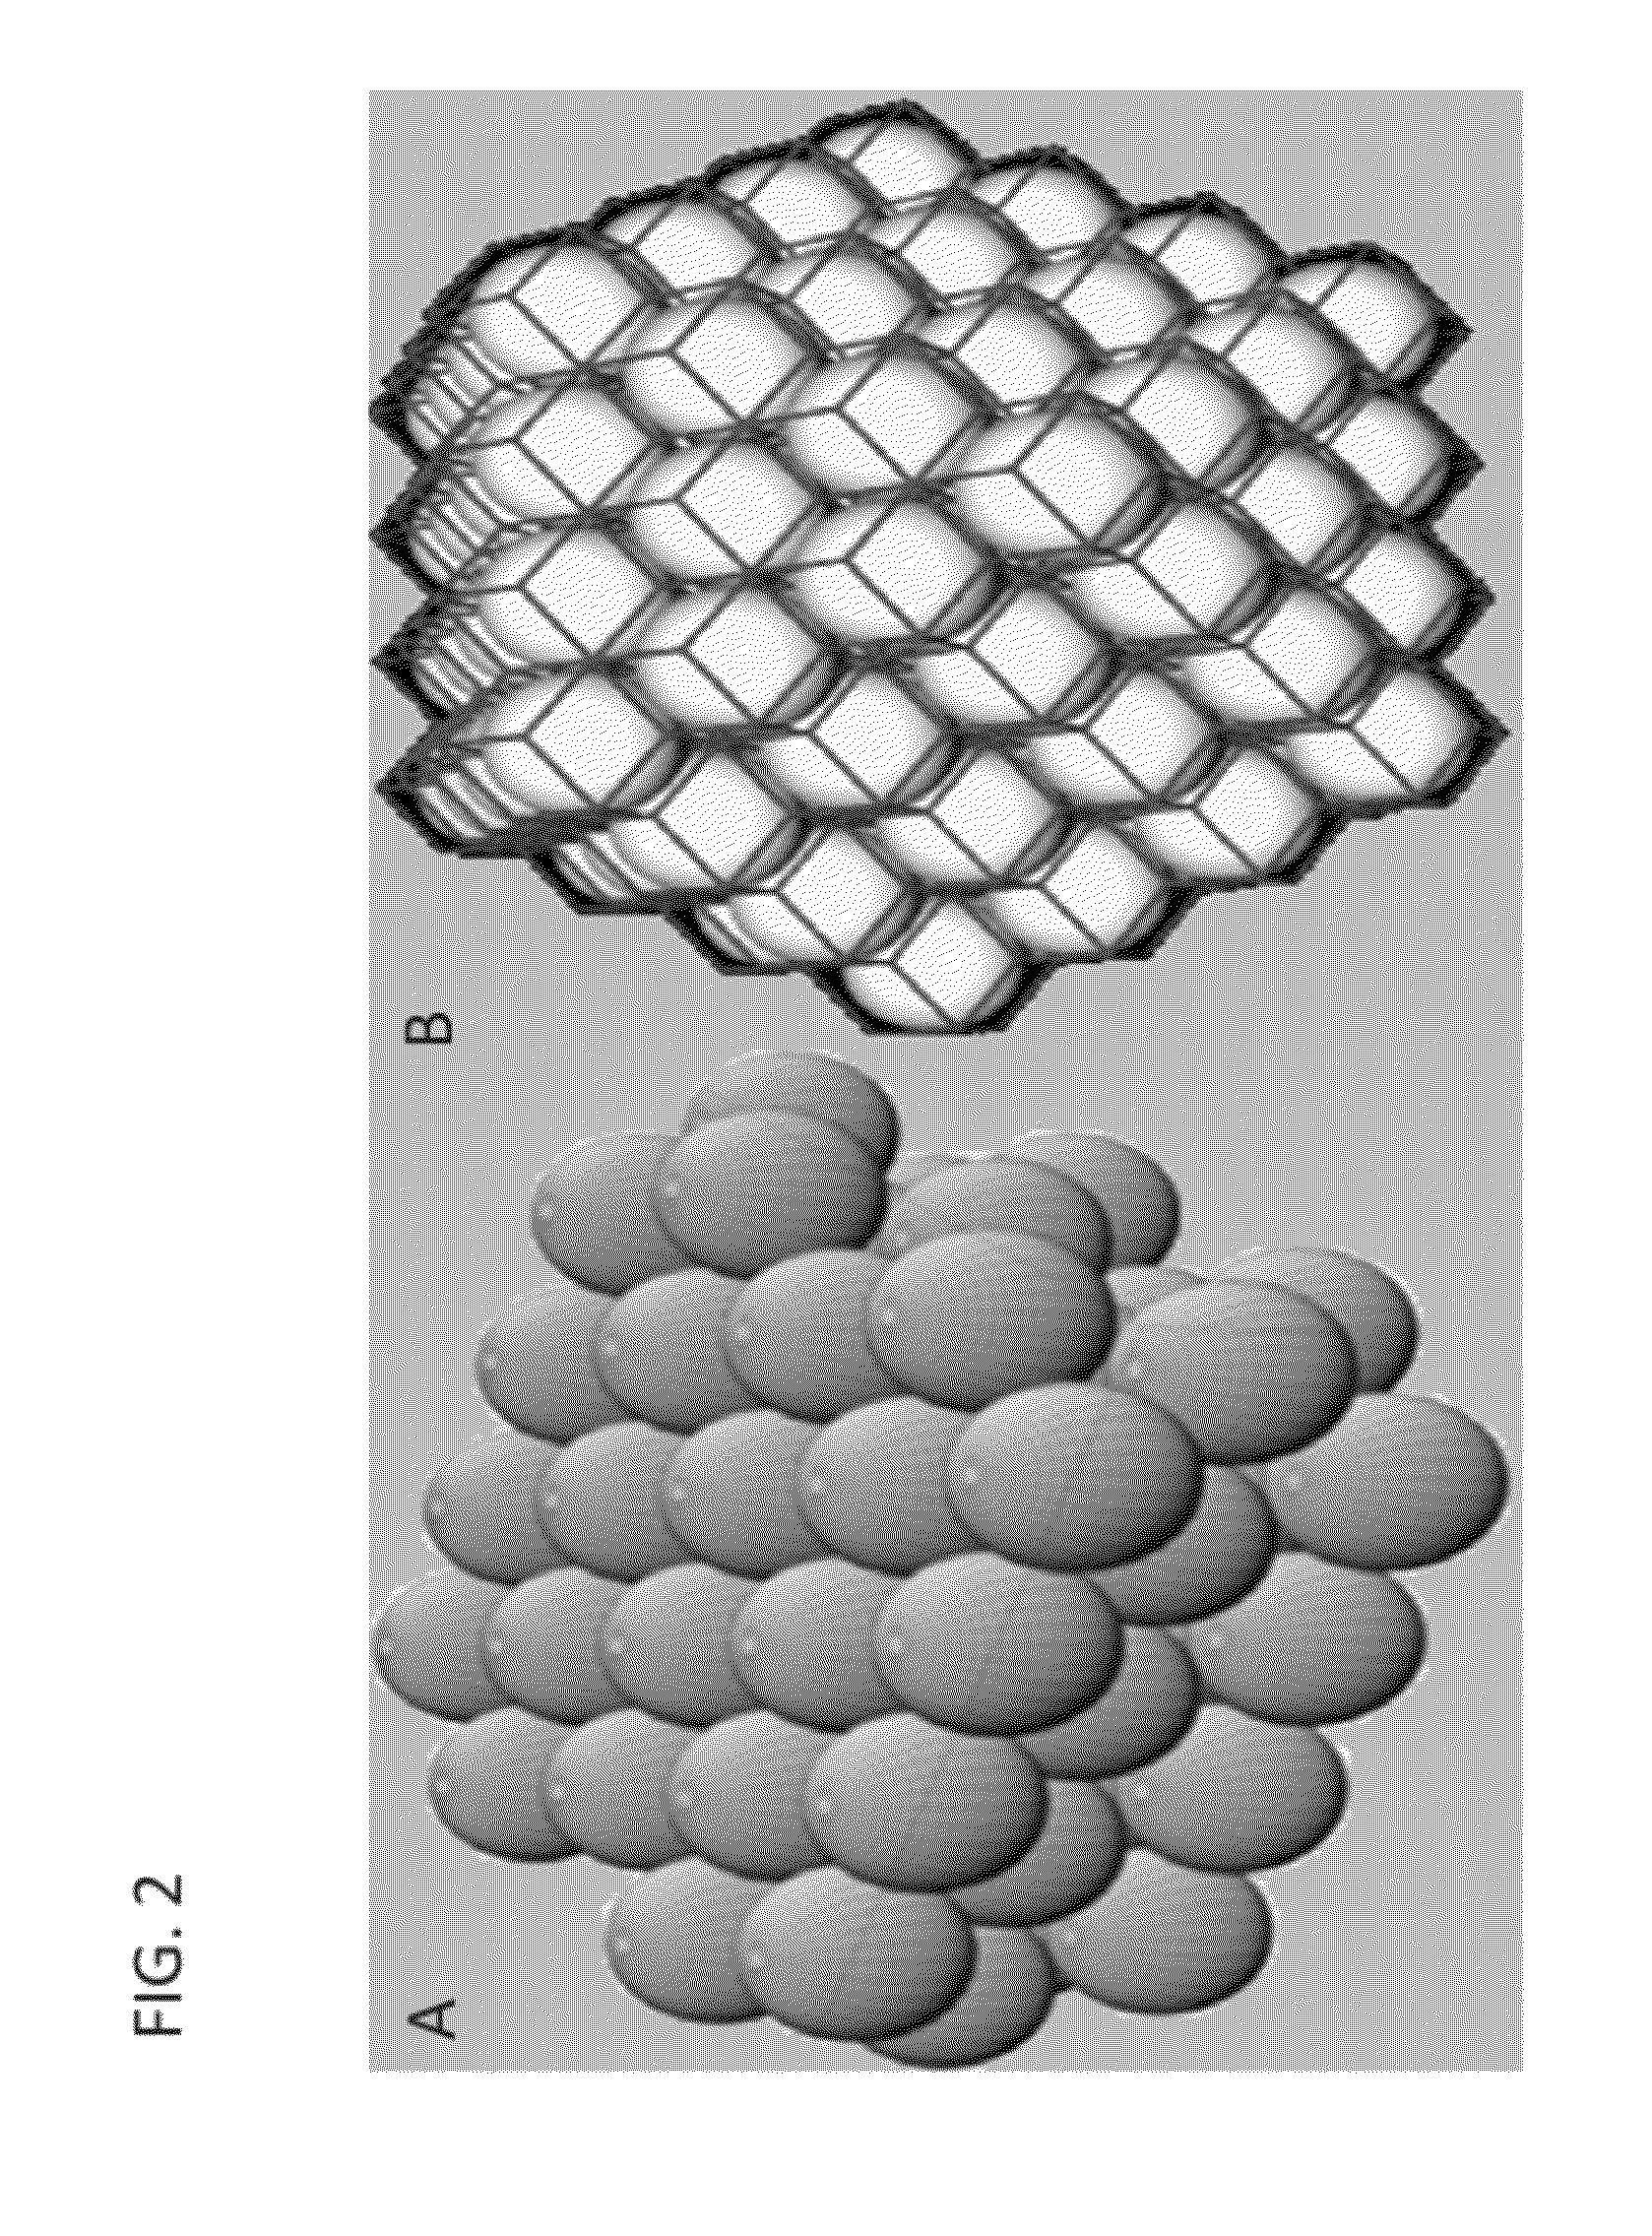 Foams Made of Amorphous Hollow Spheres and Methods of Manufacture Thereof